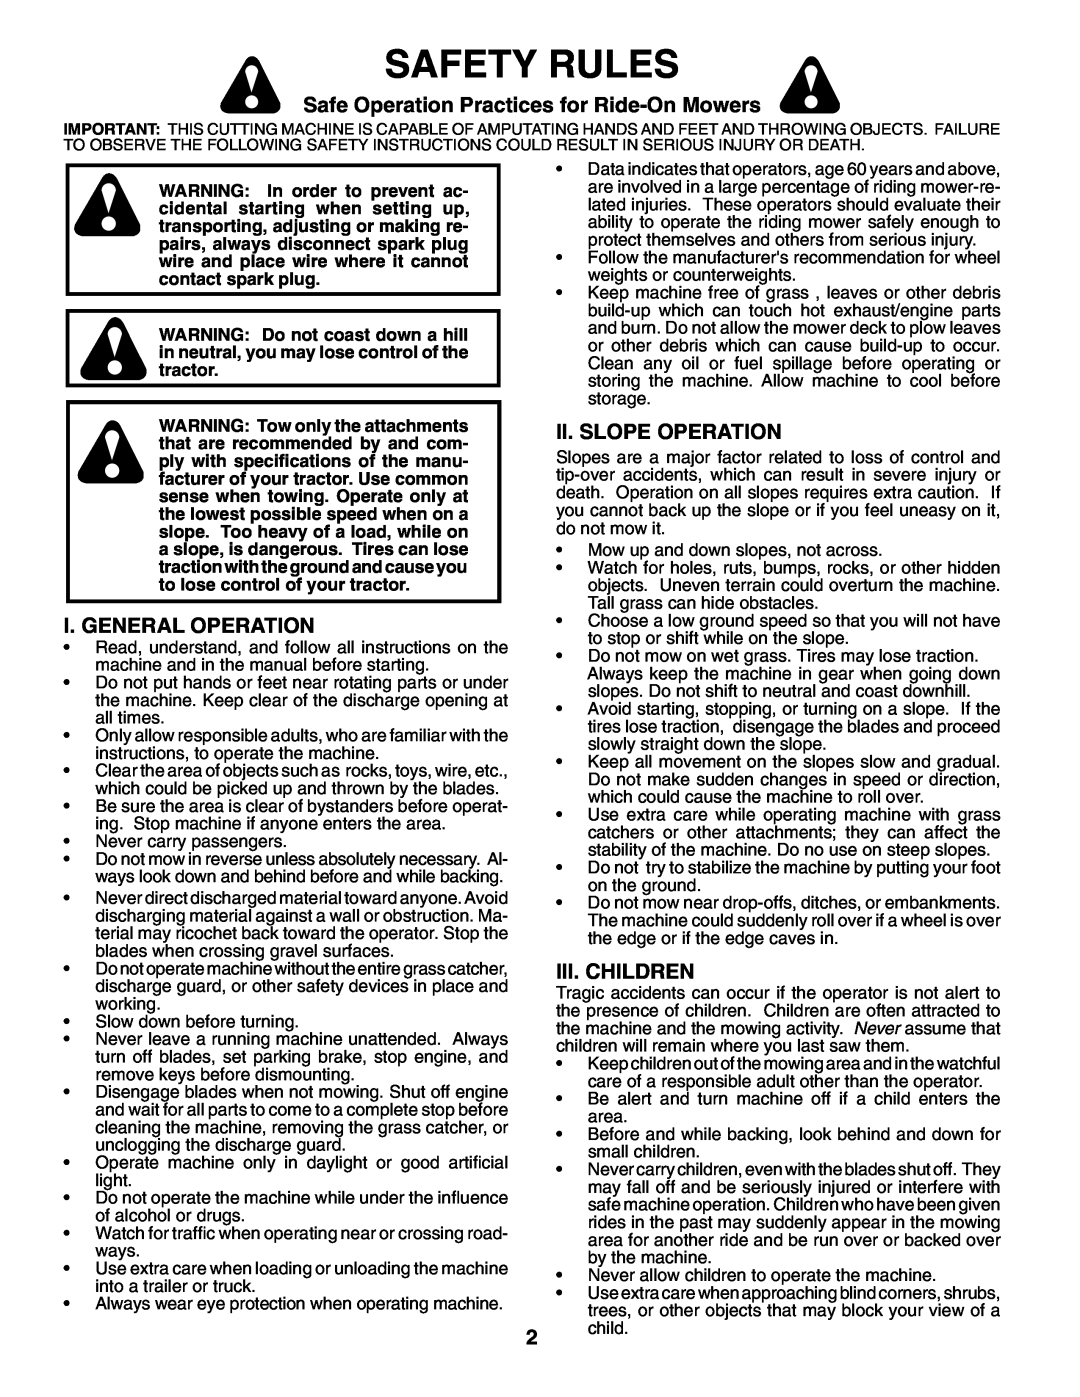 Poulan 960 72 00-13 Safety Rules, Safe Operation Practices for Ride-OnMowers, I. General Operation, Ii. Slope Operation 